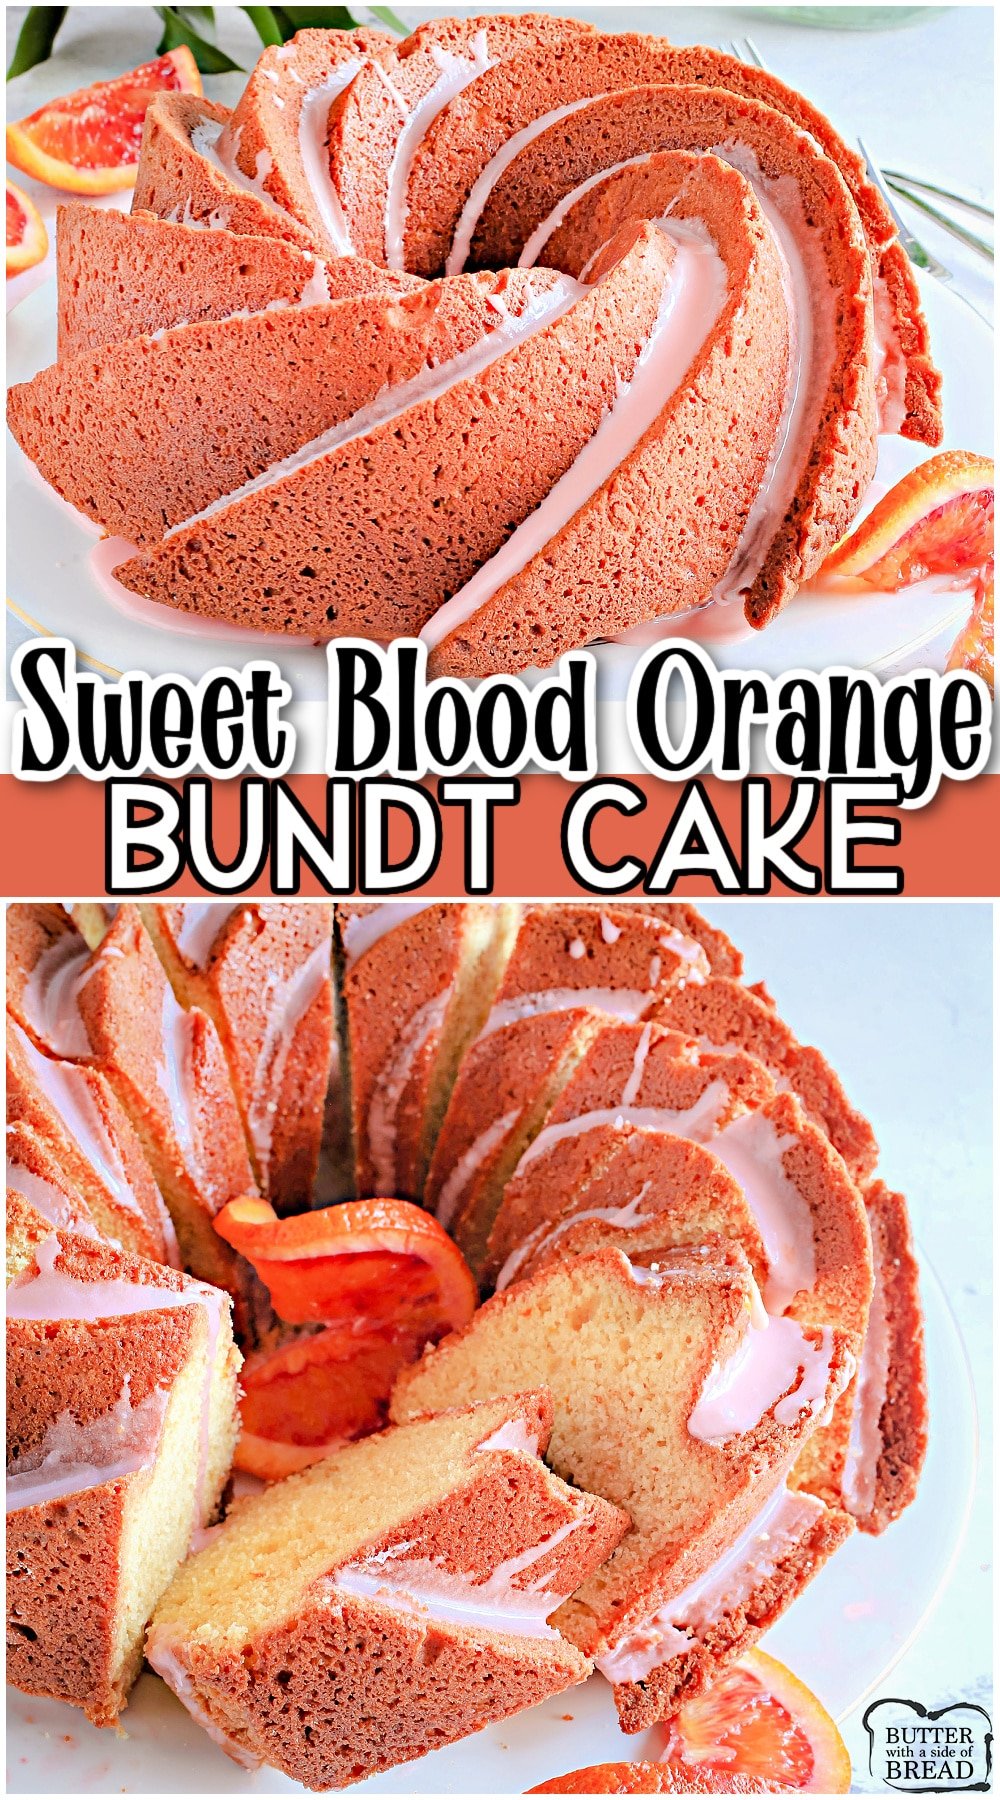 Blood Orange Bundt Cake is made from scratch and packed with delicious citrus flavor in every bite. This orange bundt cake with glaze is fluffy, moist and the simple glaze on top adds just the right amount of extra sweetness.